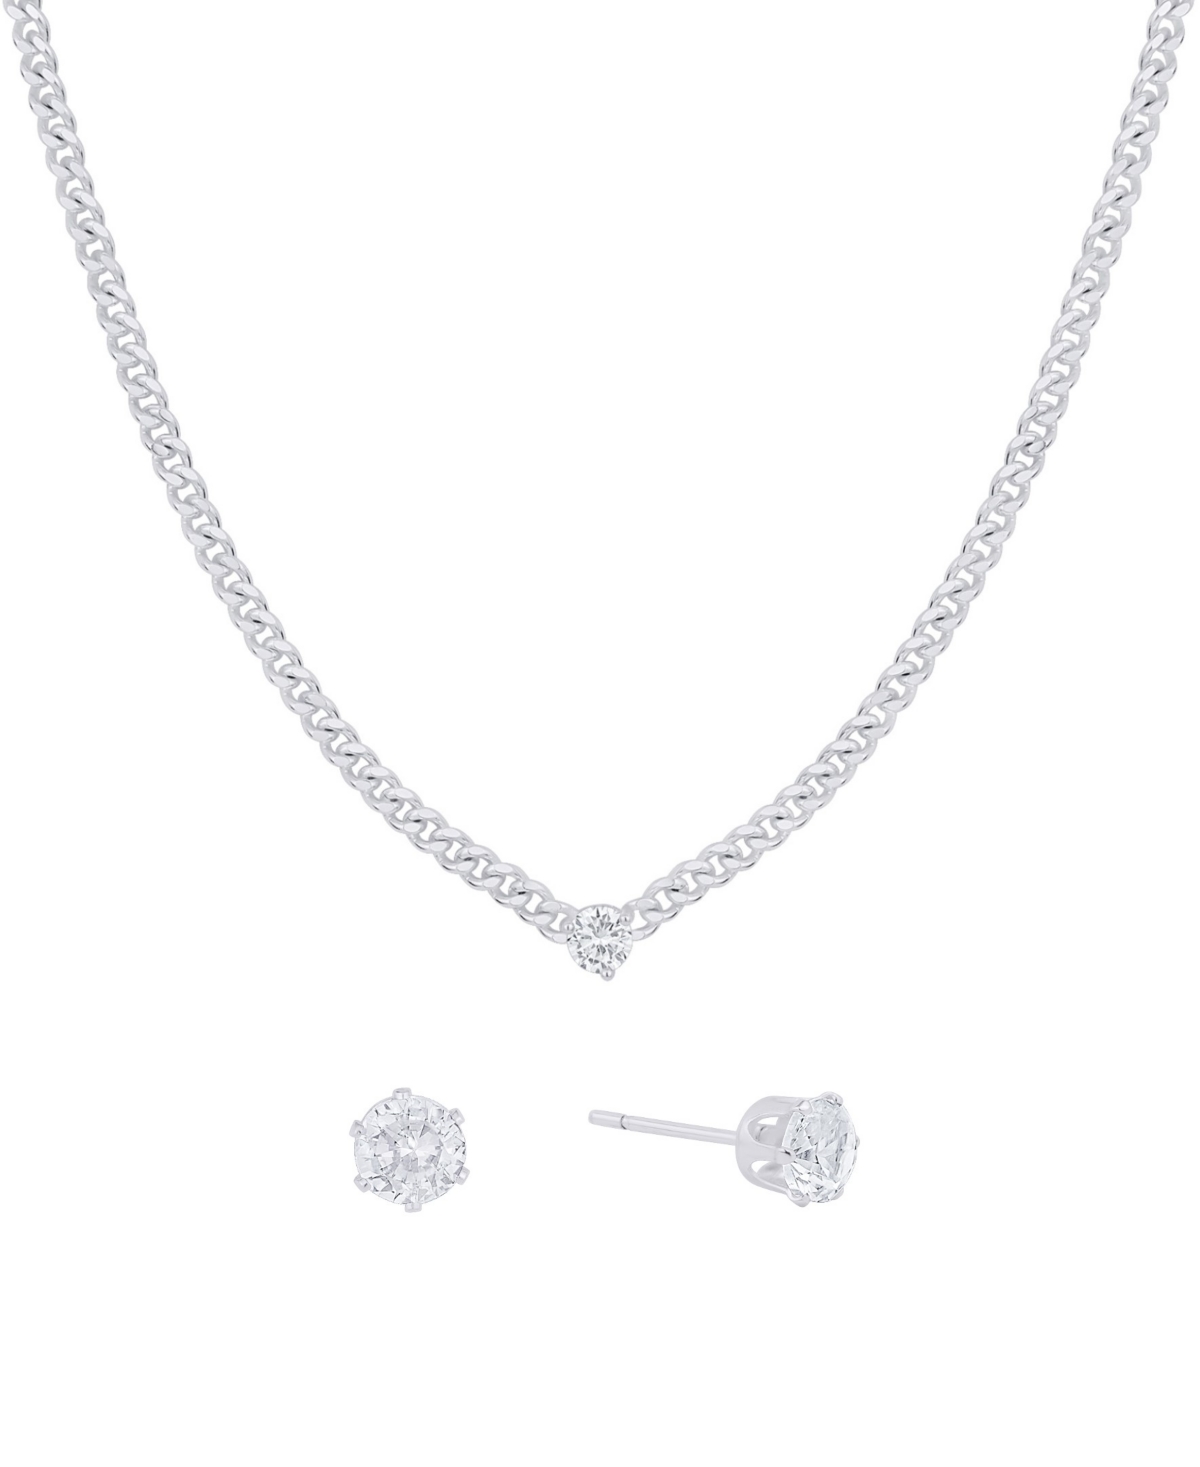 Cubic Zirconia Stud Earring and Necklace with Jewelry Box Set - Silver